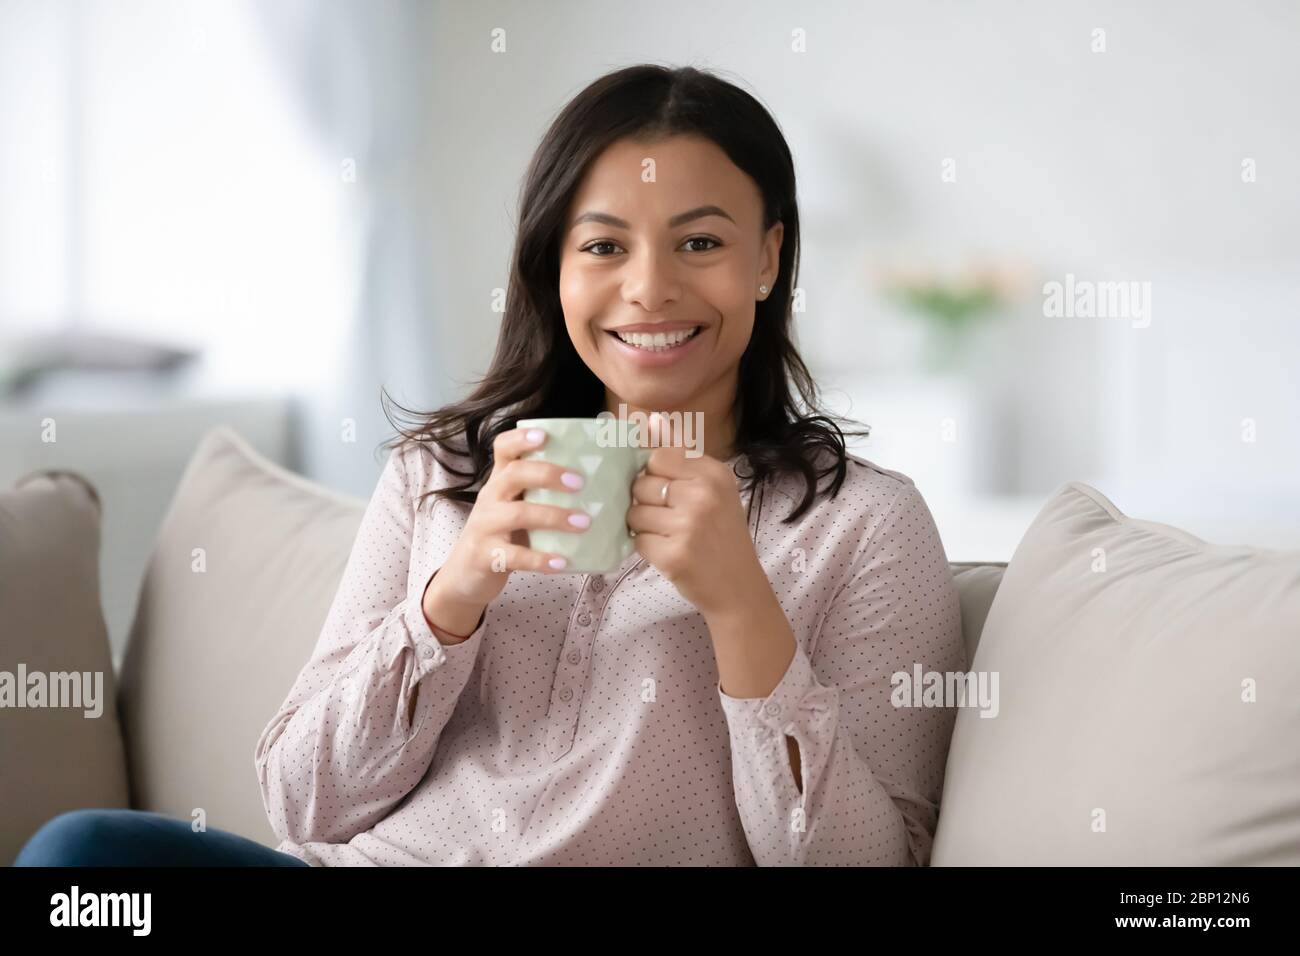 African woman holding cup enjoy coffee pause at home Stock Photo